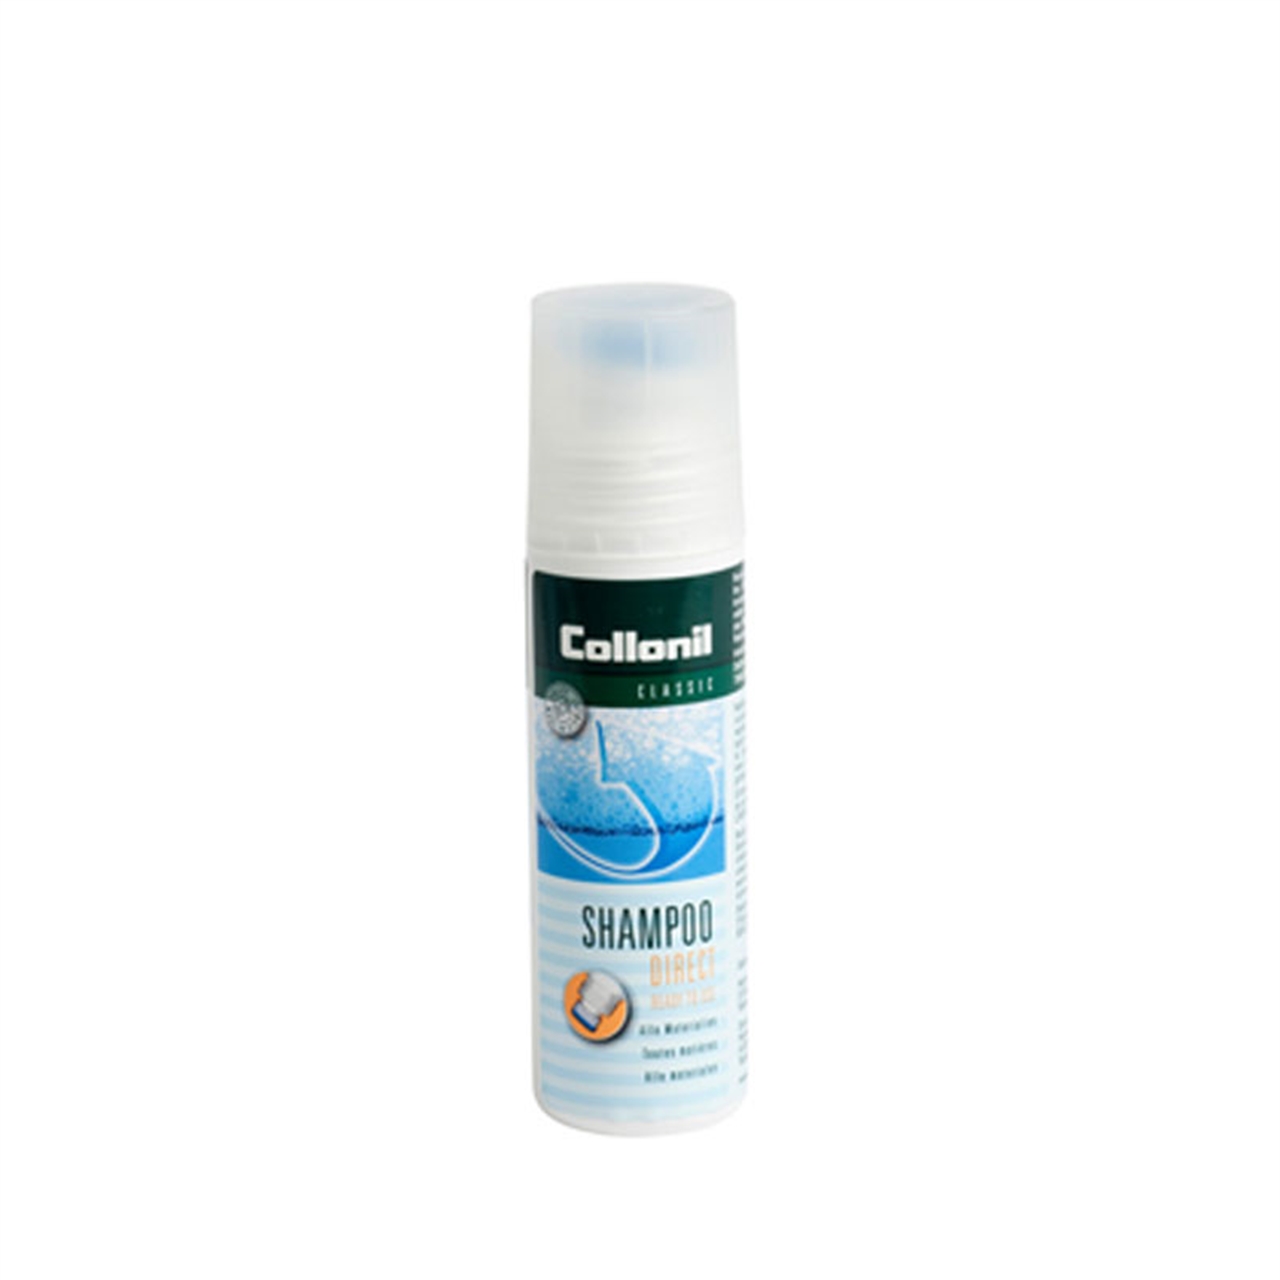 Afbeelding van Collonil Shampoo direct ready to use